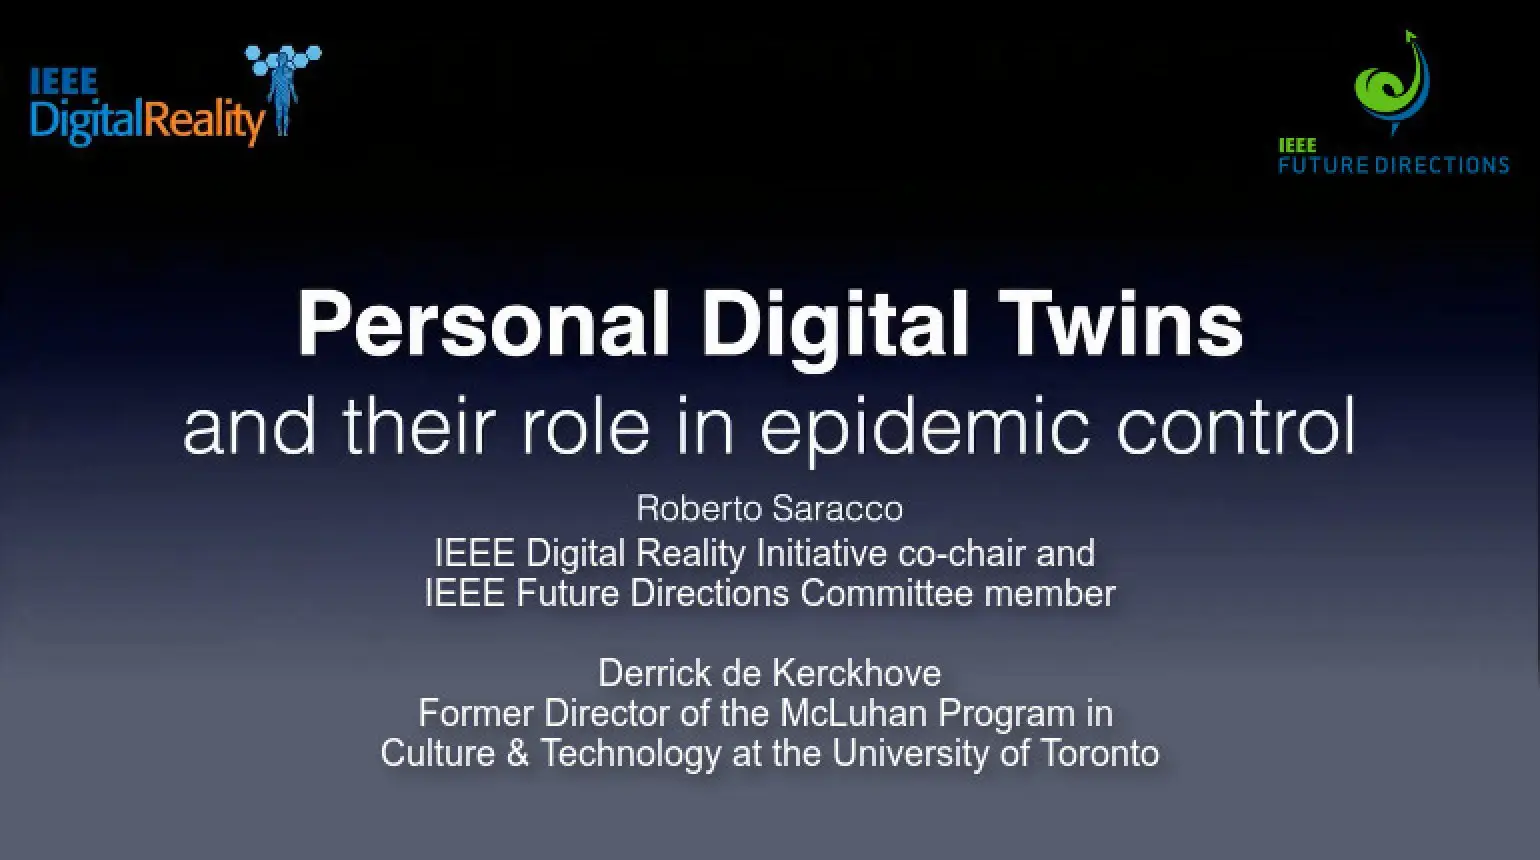 Personal Digital Twins (PDTs) and Their Role in Epidemics Control